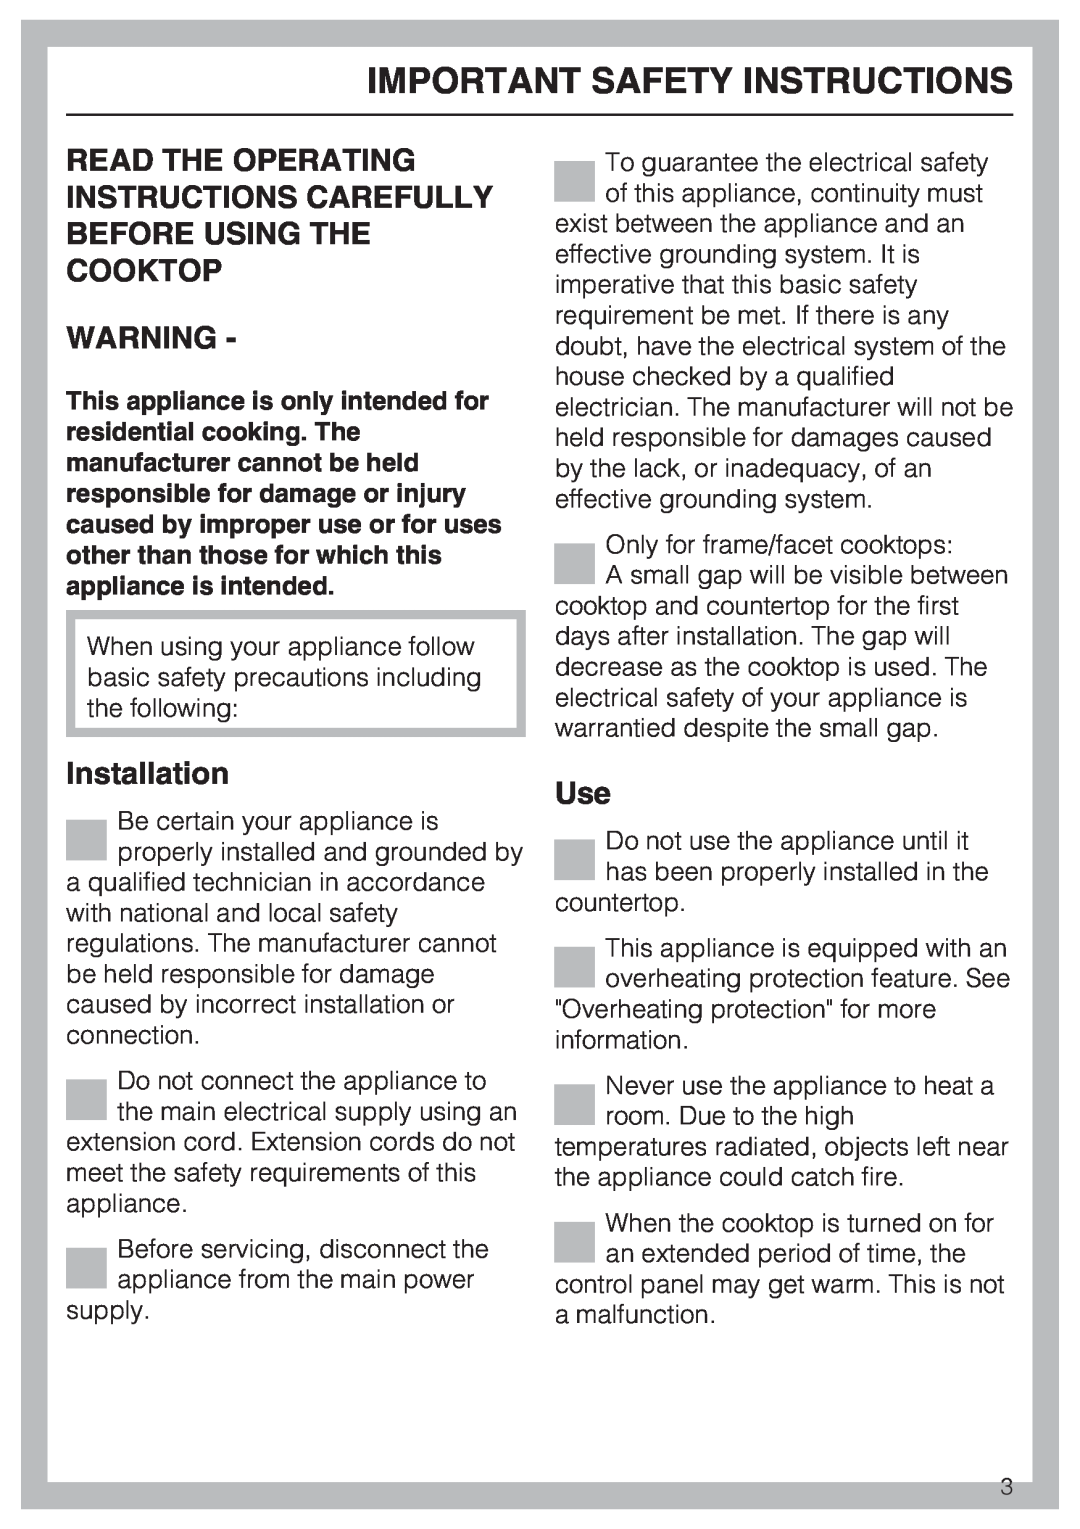 Miele KM5676 installation instructions Important Safety Instructions, Installation 